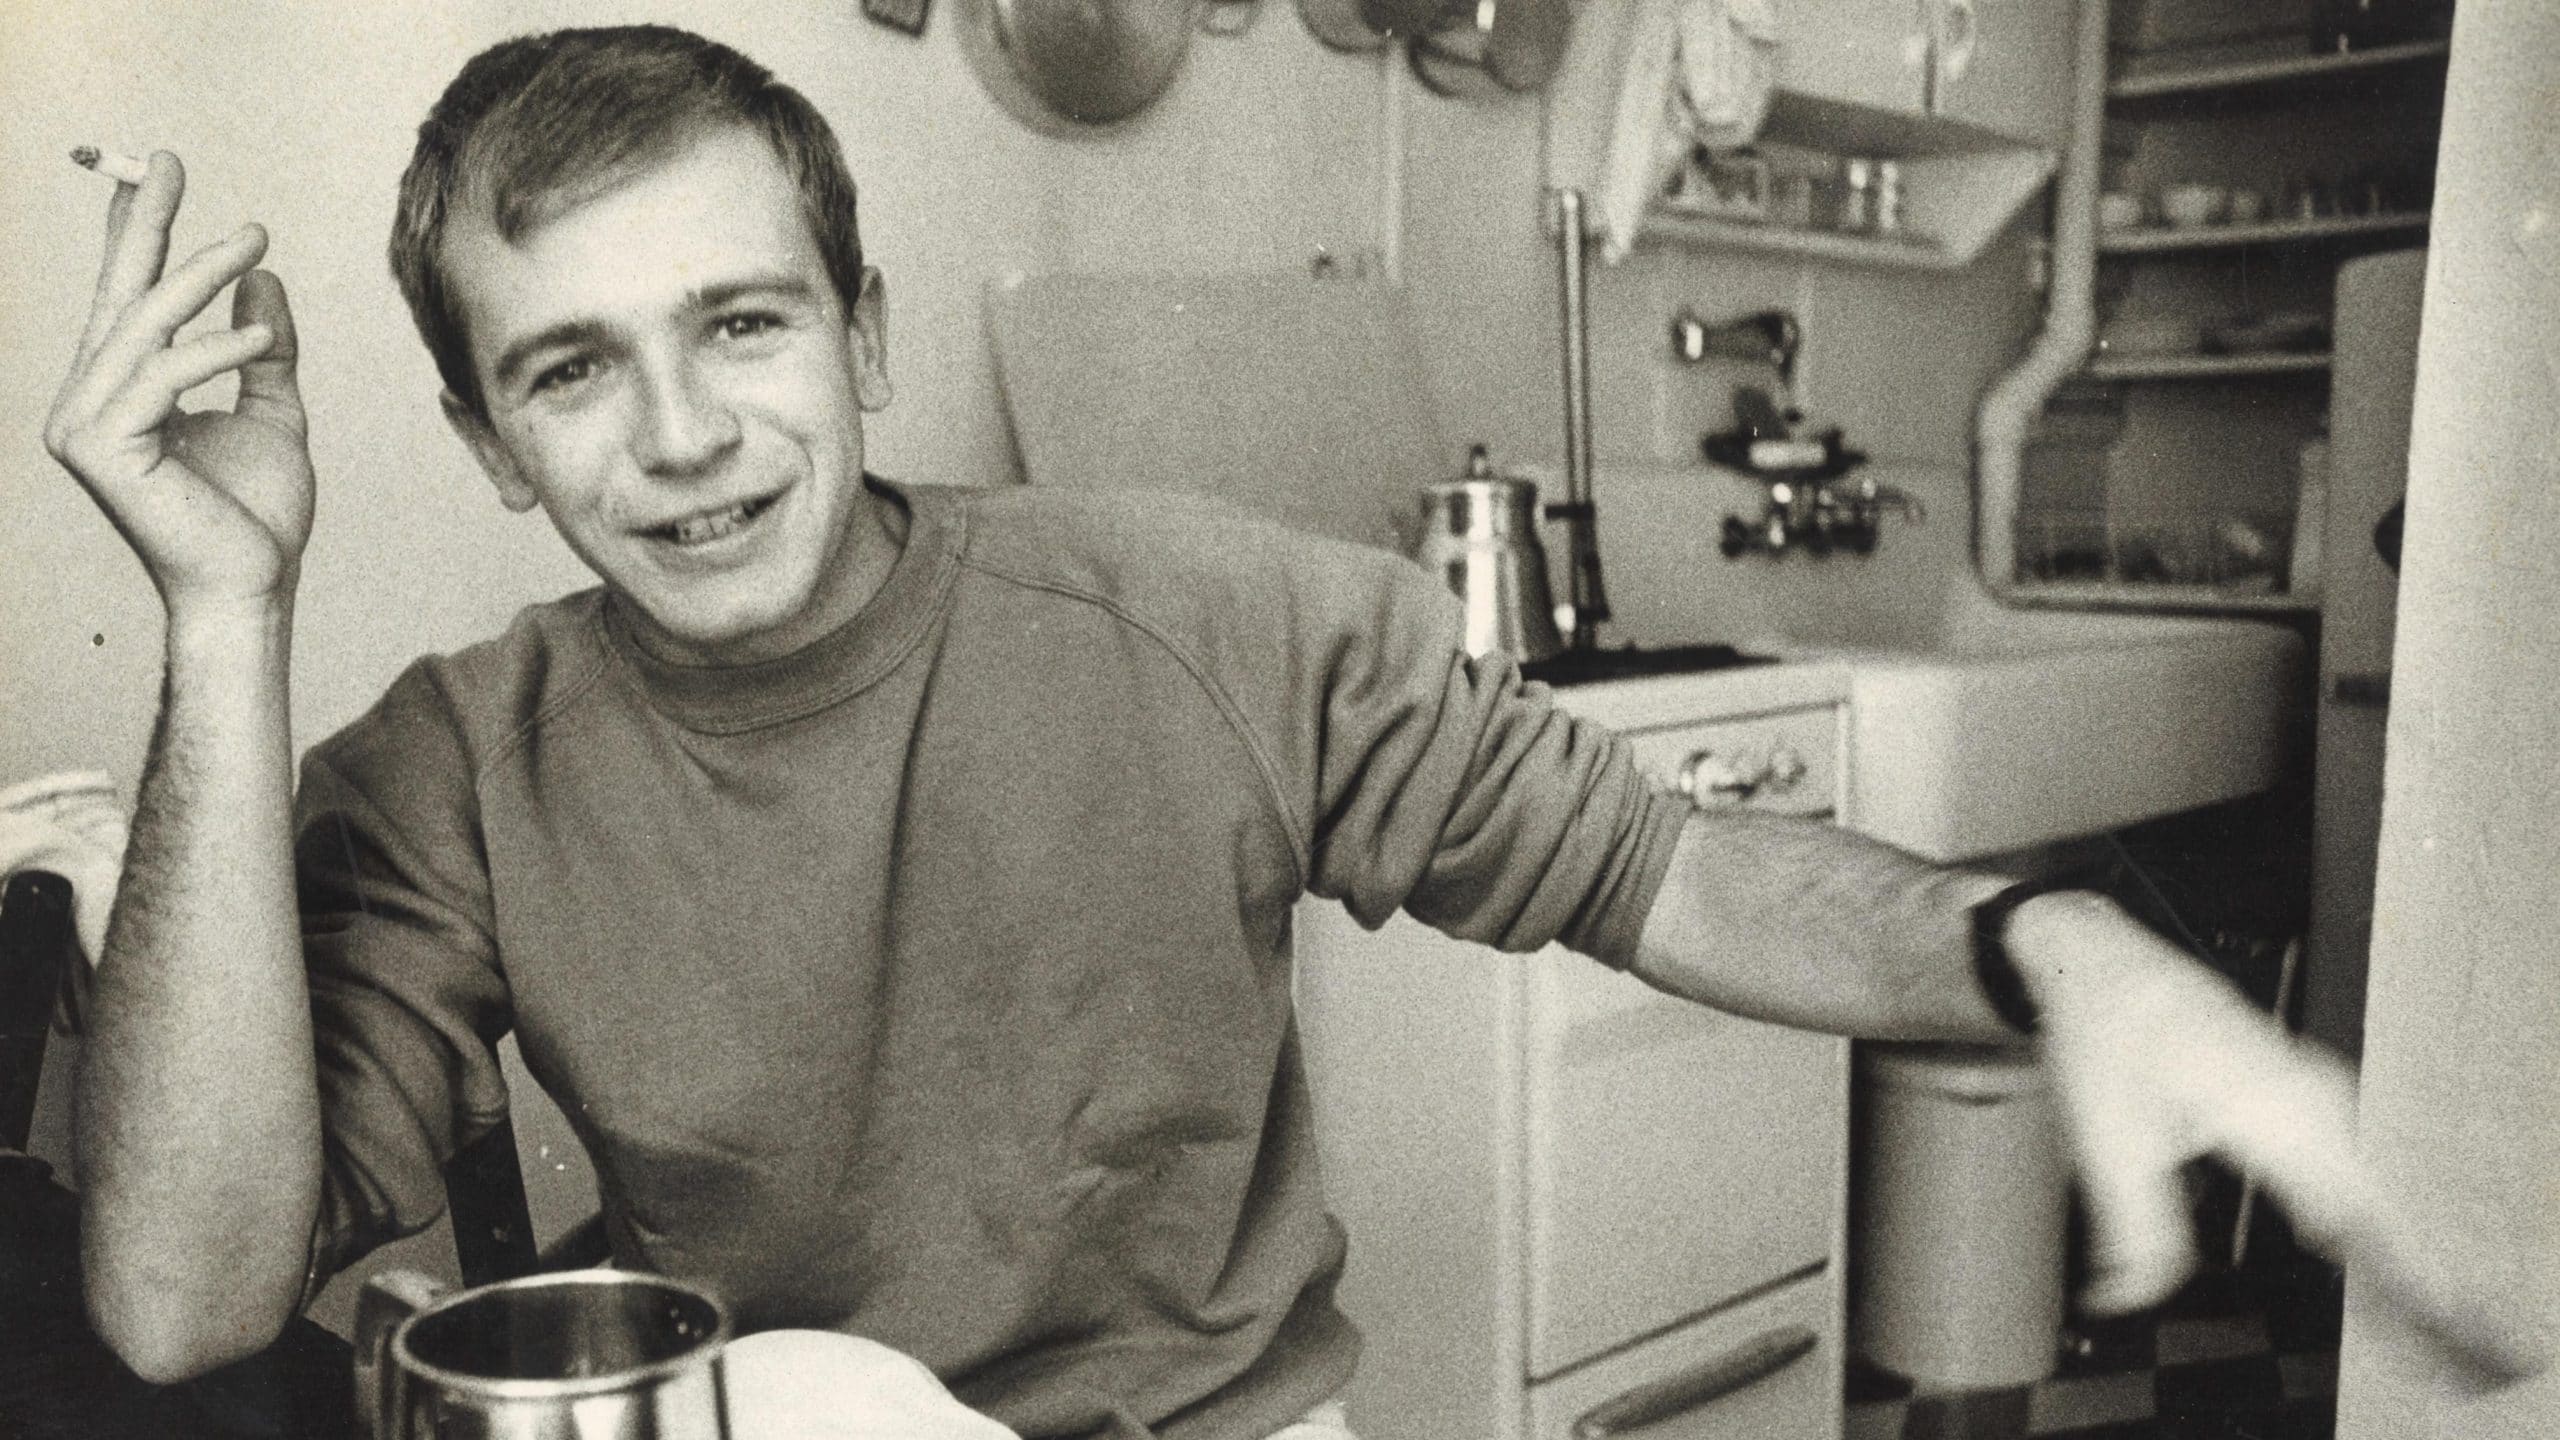 terrence mcnally dead